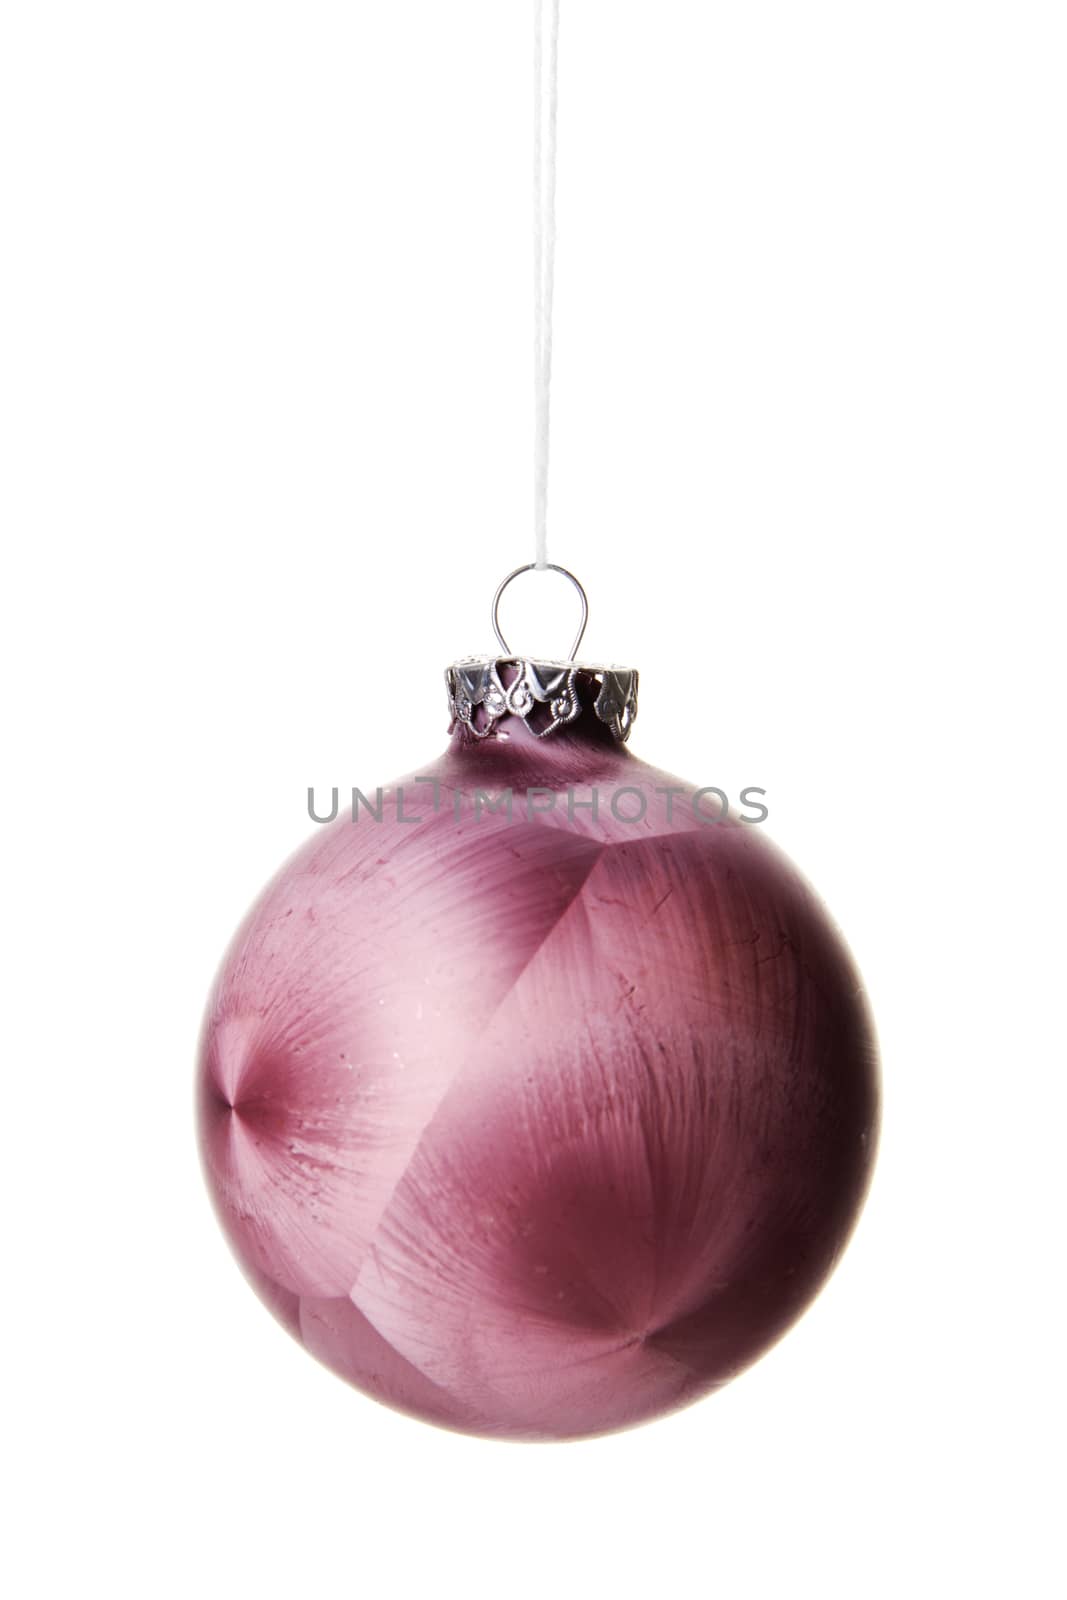 pink christmas bauble with pattern isolated hanging with white background 